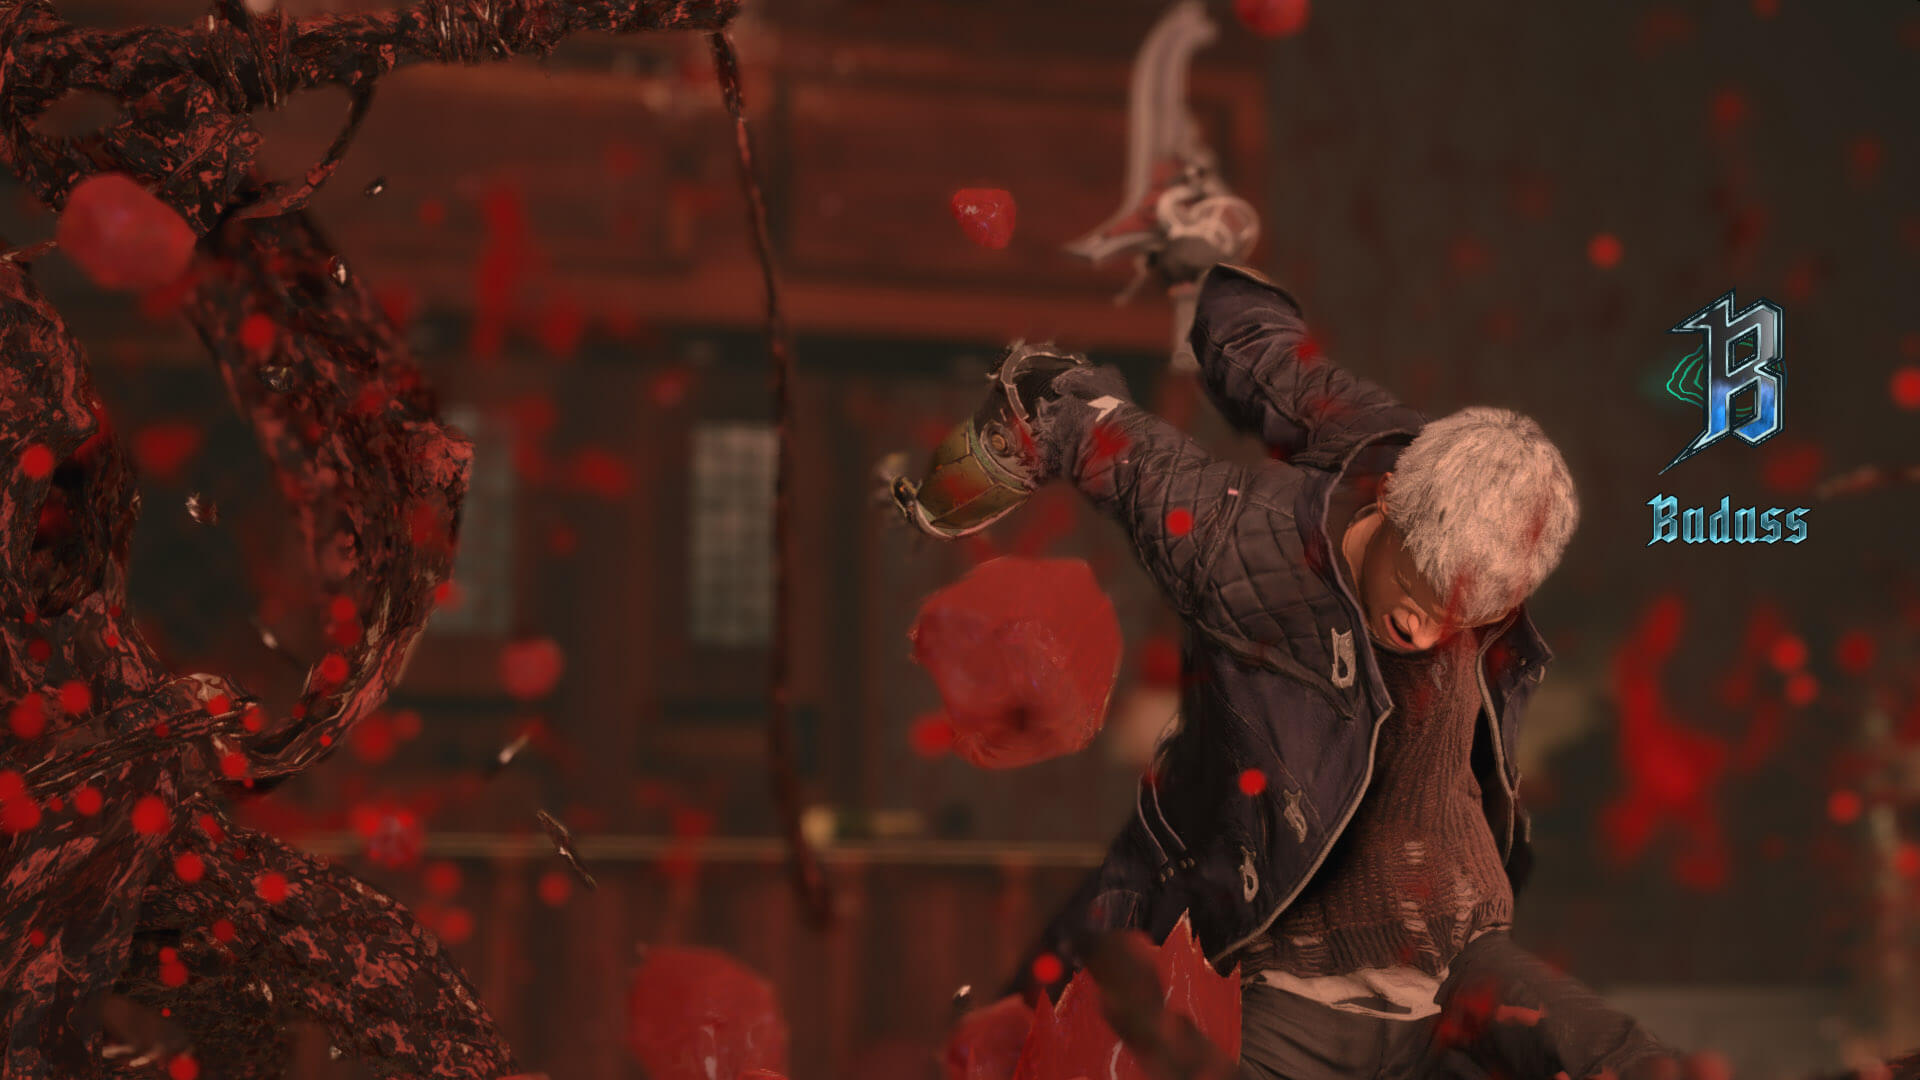 Devil May Cry 5 is Fantastic, but DmC: Devil May Cry is More Relevant